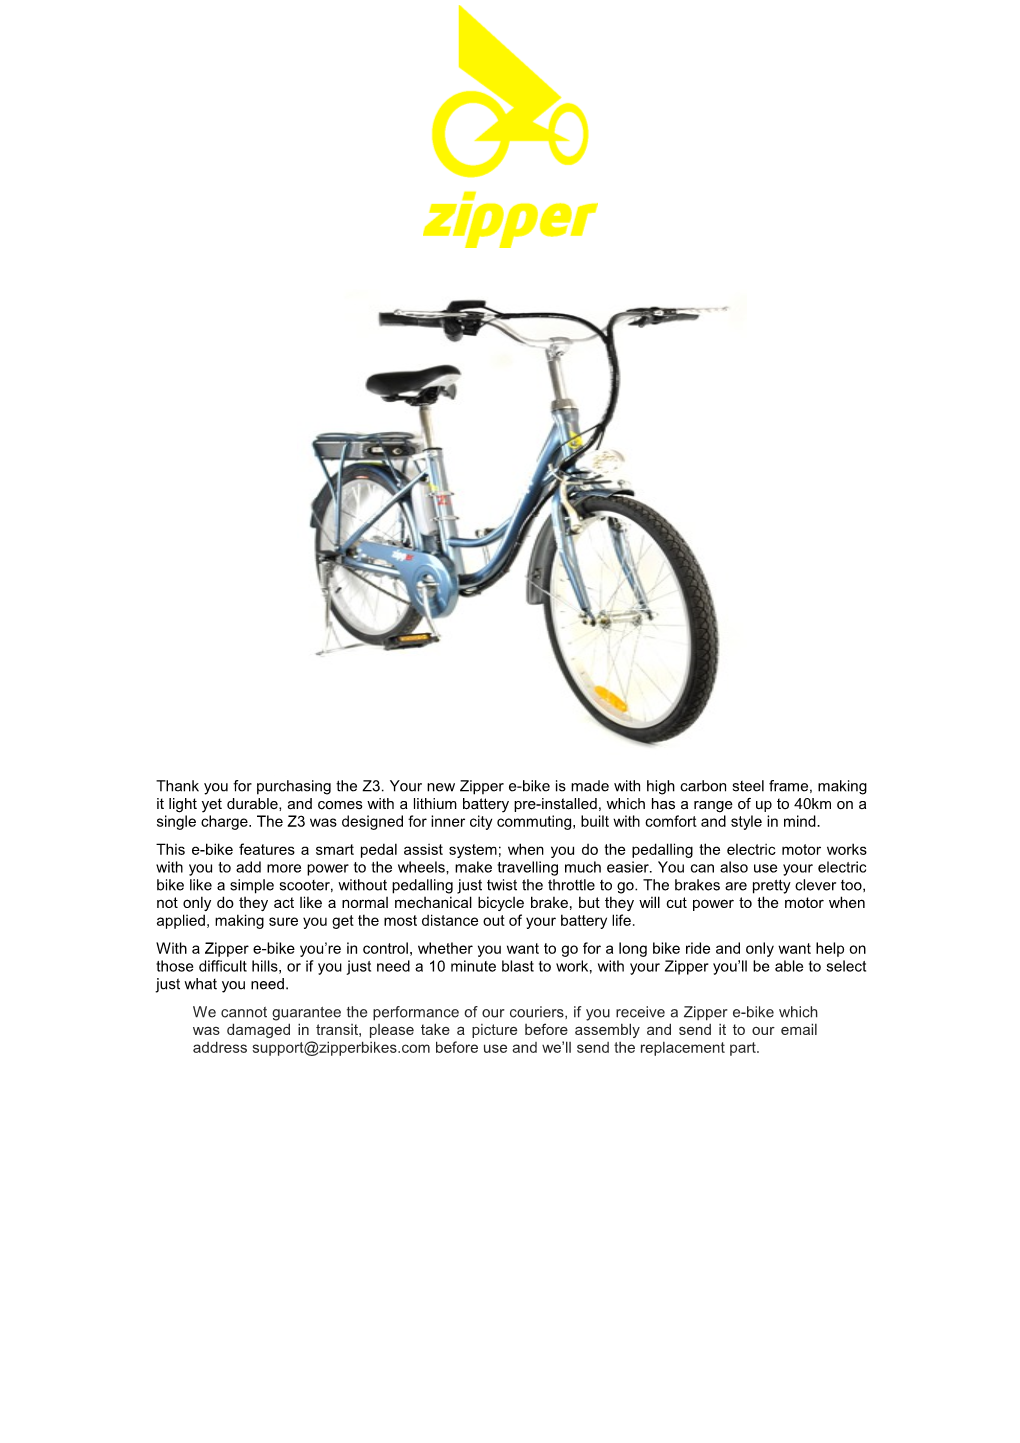 Thank You for Purchasing the Z3. Your New Zipper E-Bike Is Made with High Carbon Steel